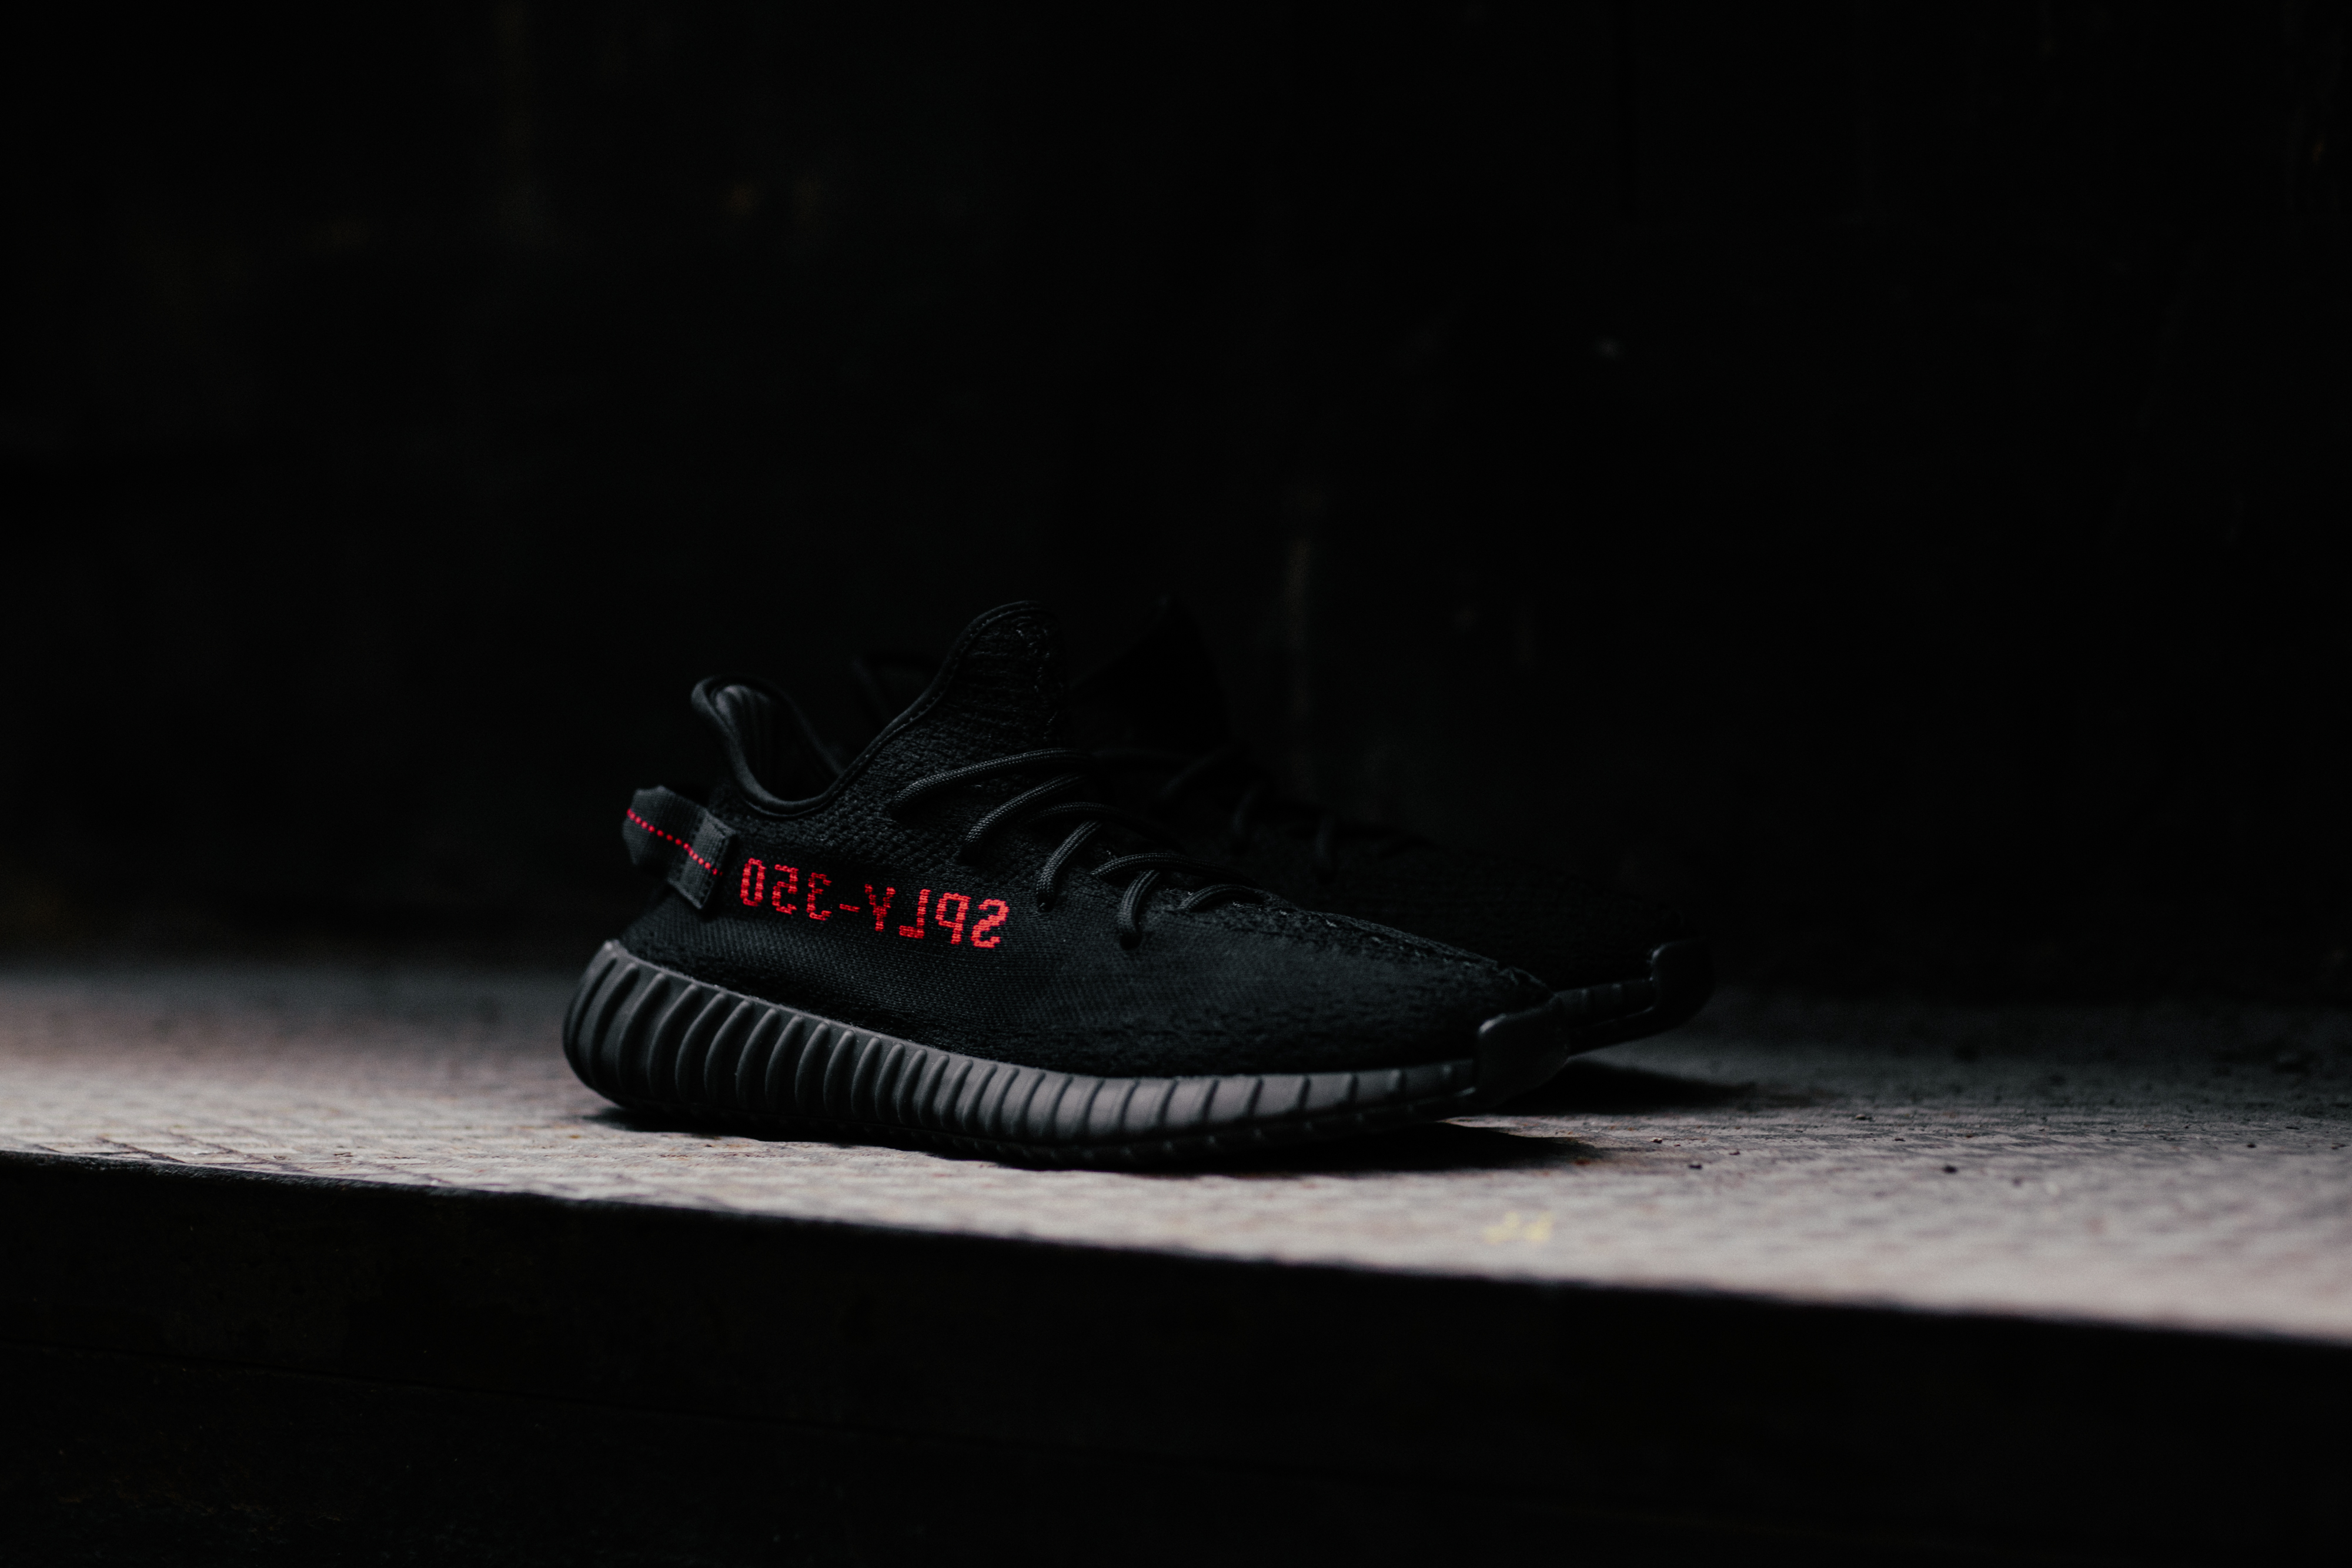 Adidas Yeezy Boost 350 v2 Core Black Red Bred Size 8 5 US